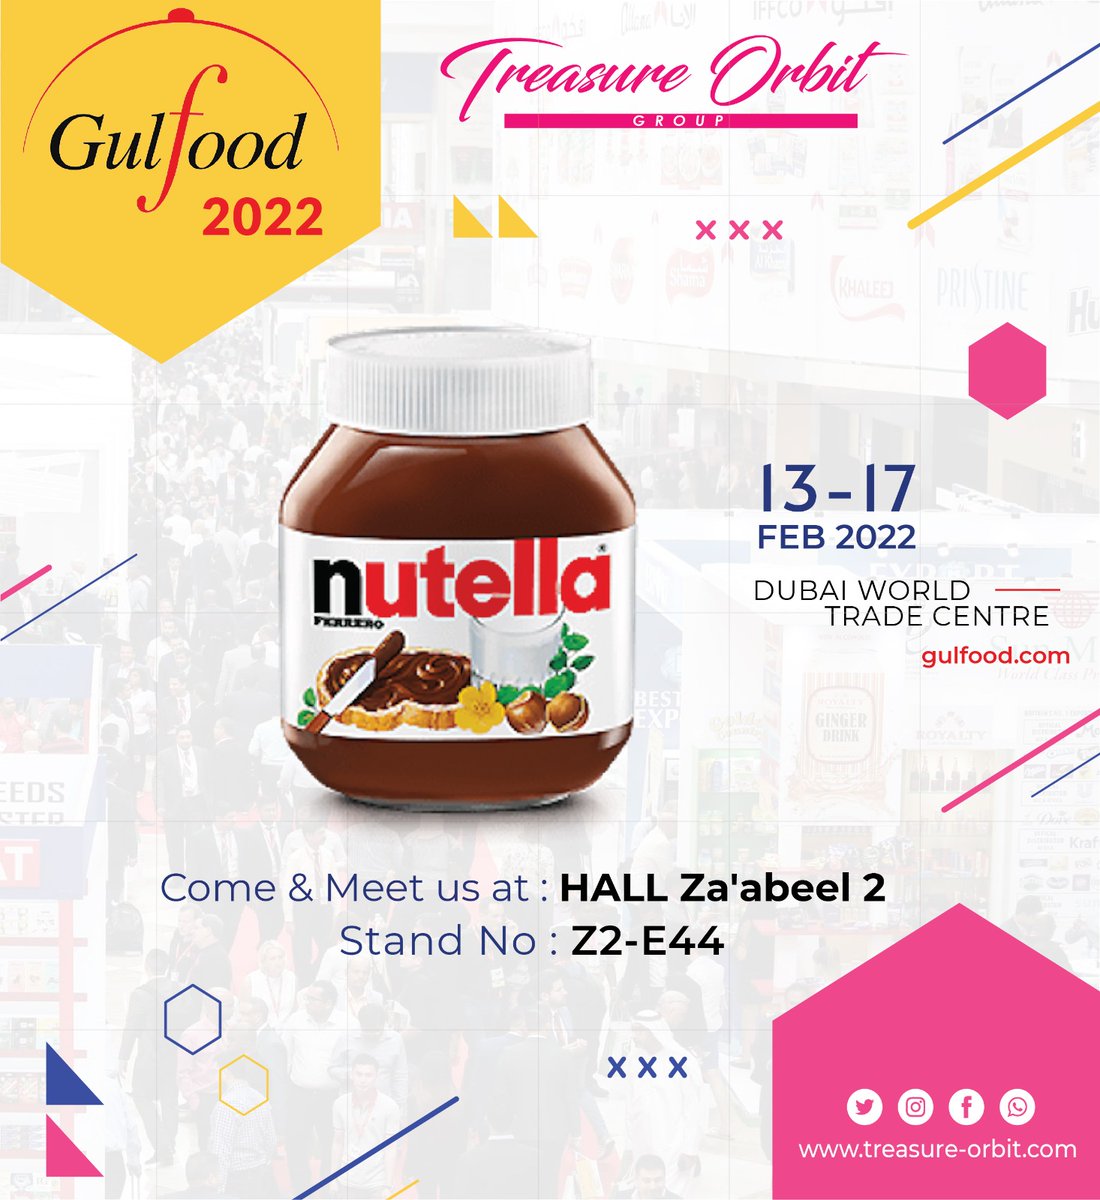 Gulfood has started! 
Come and meet us at Stand No: Z2-E44 at the hall Za'abeel 2.

#gulfood2022 #exhibition #foodexhibition #foodanddrink   #energydrink #fmcg #confectionery #personalcare #moonwater
#gulfoodexhibitors